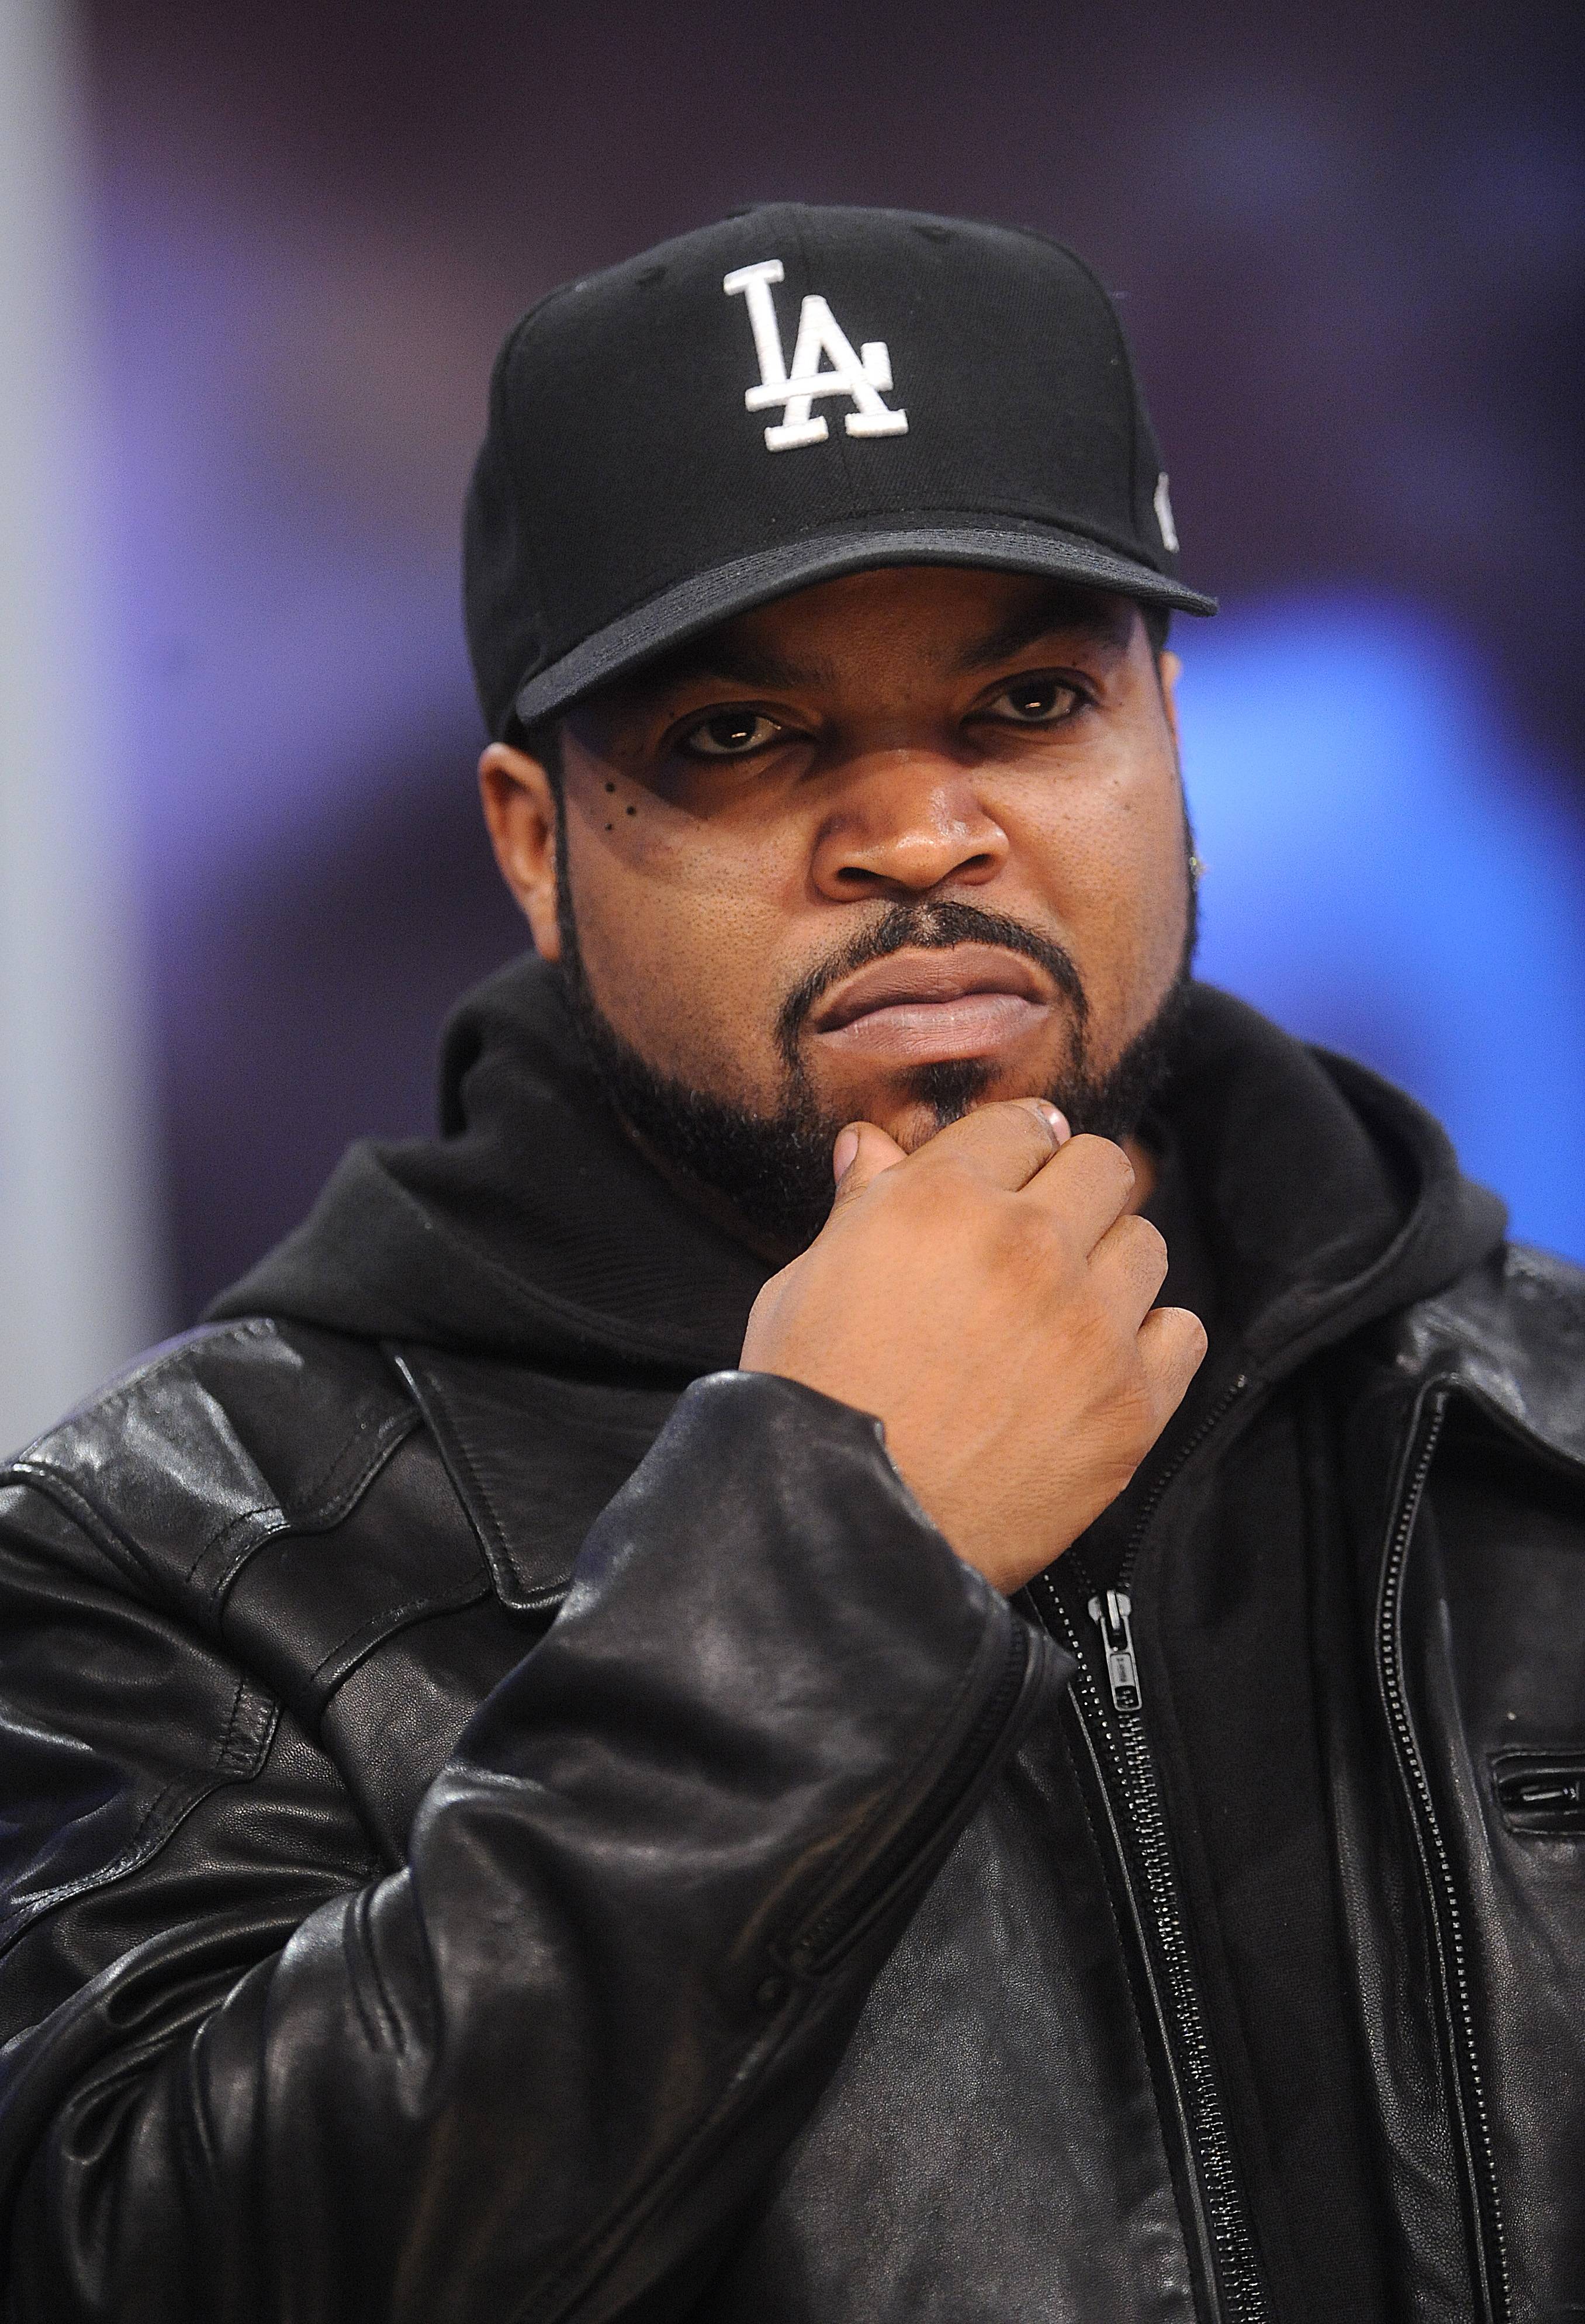 Ice Cube - Ice Cube took shots at Weezy — along with Jay-Z, Kanye and Eminem — on “Drink the Kool Aid” in 2010, spitting, “This ain’t Tha Carter.”(Photo: Brad Barket/PictureGroup)